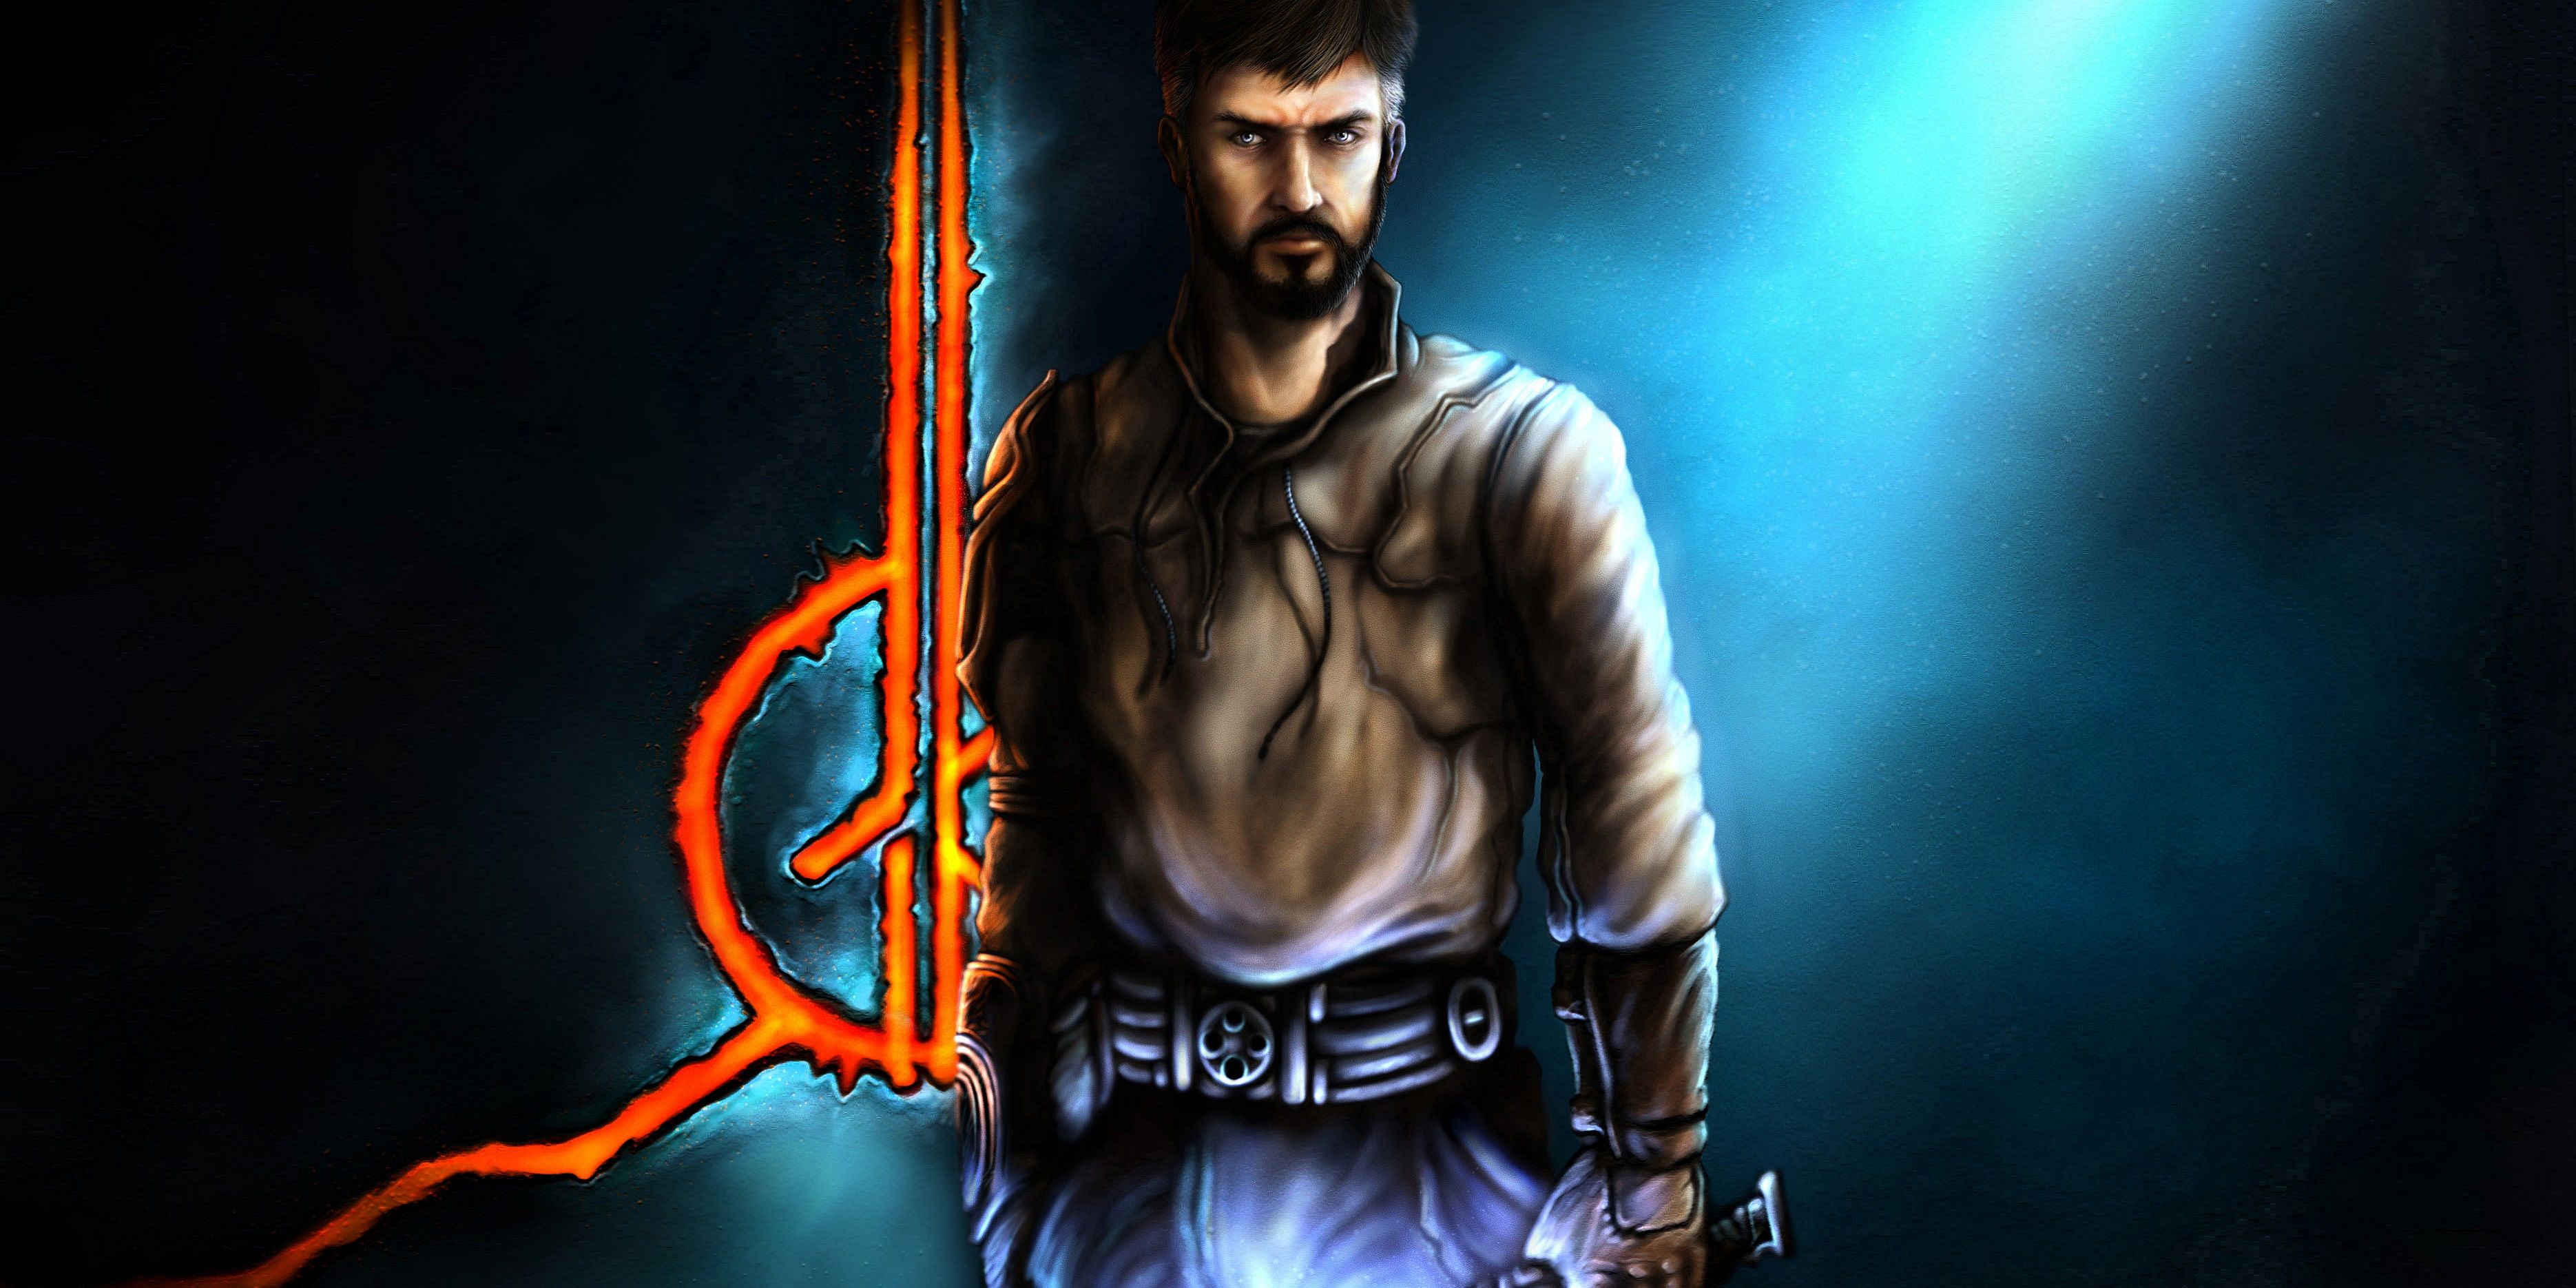 Kyle Katarn was a an all-time legend in the Jedi Order. 